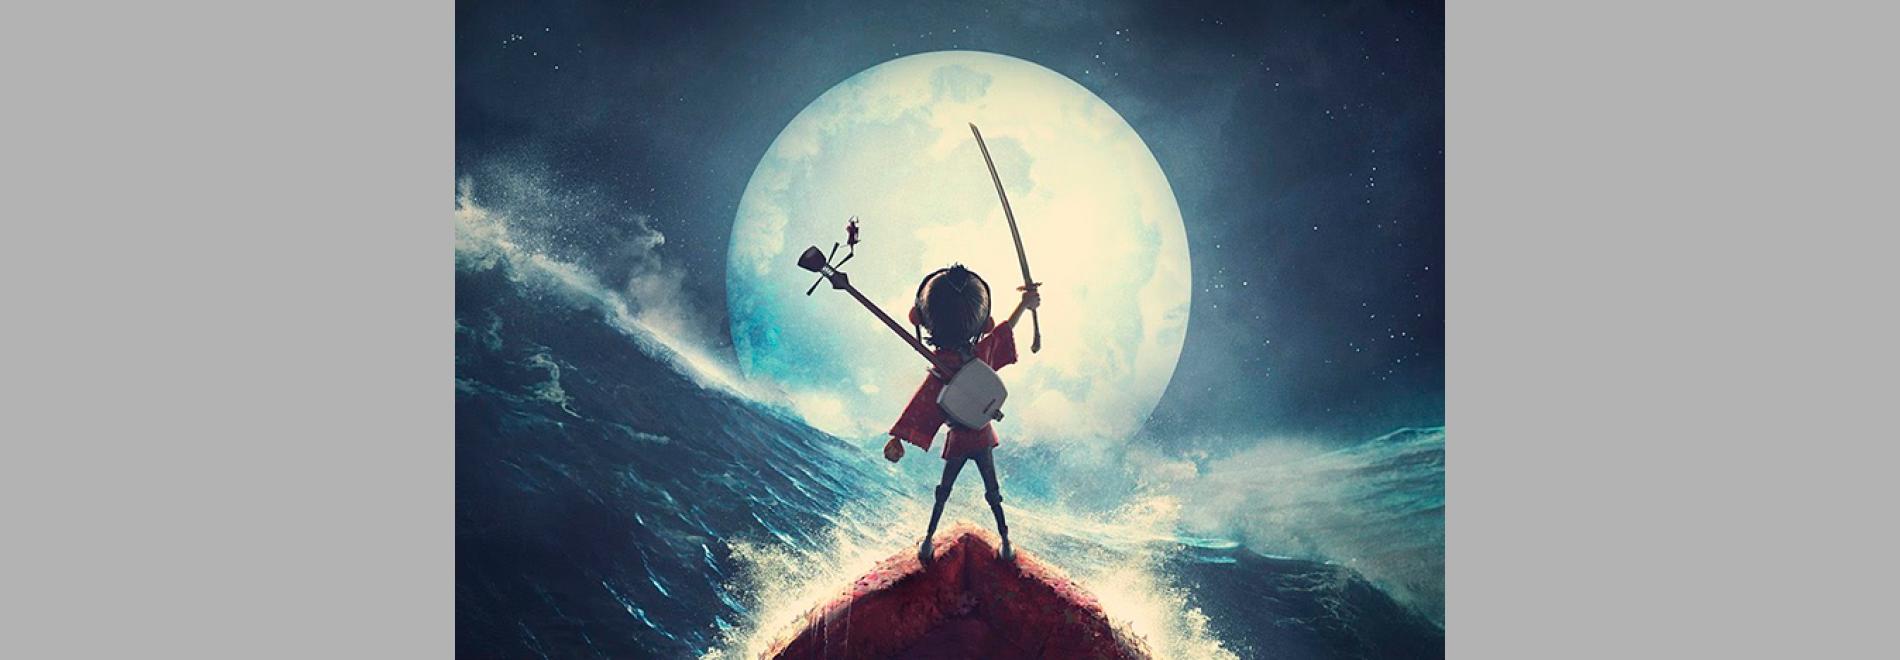 Kubo and the Two Strings (Travis Knight, 2016)